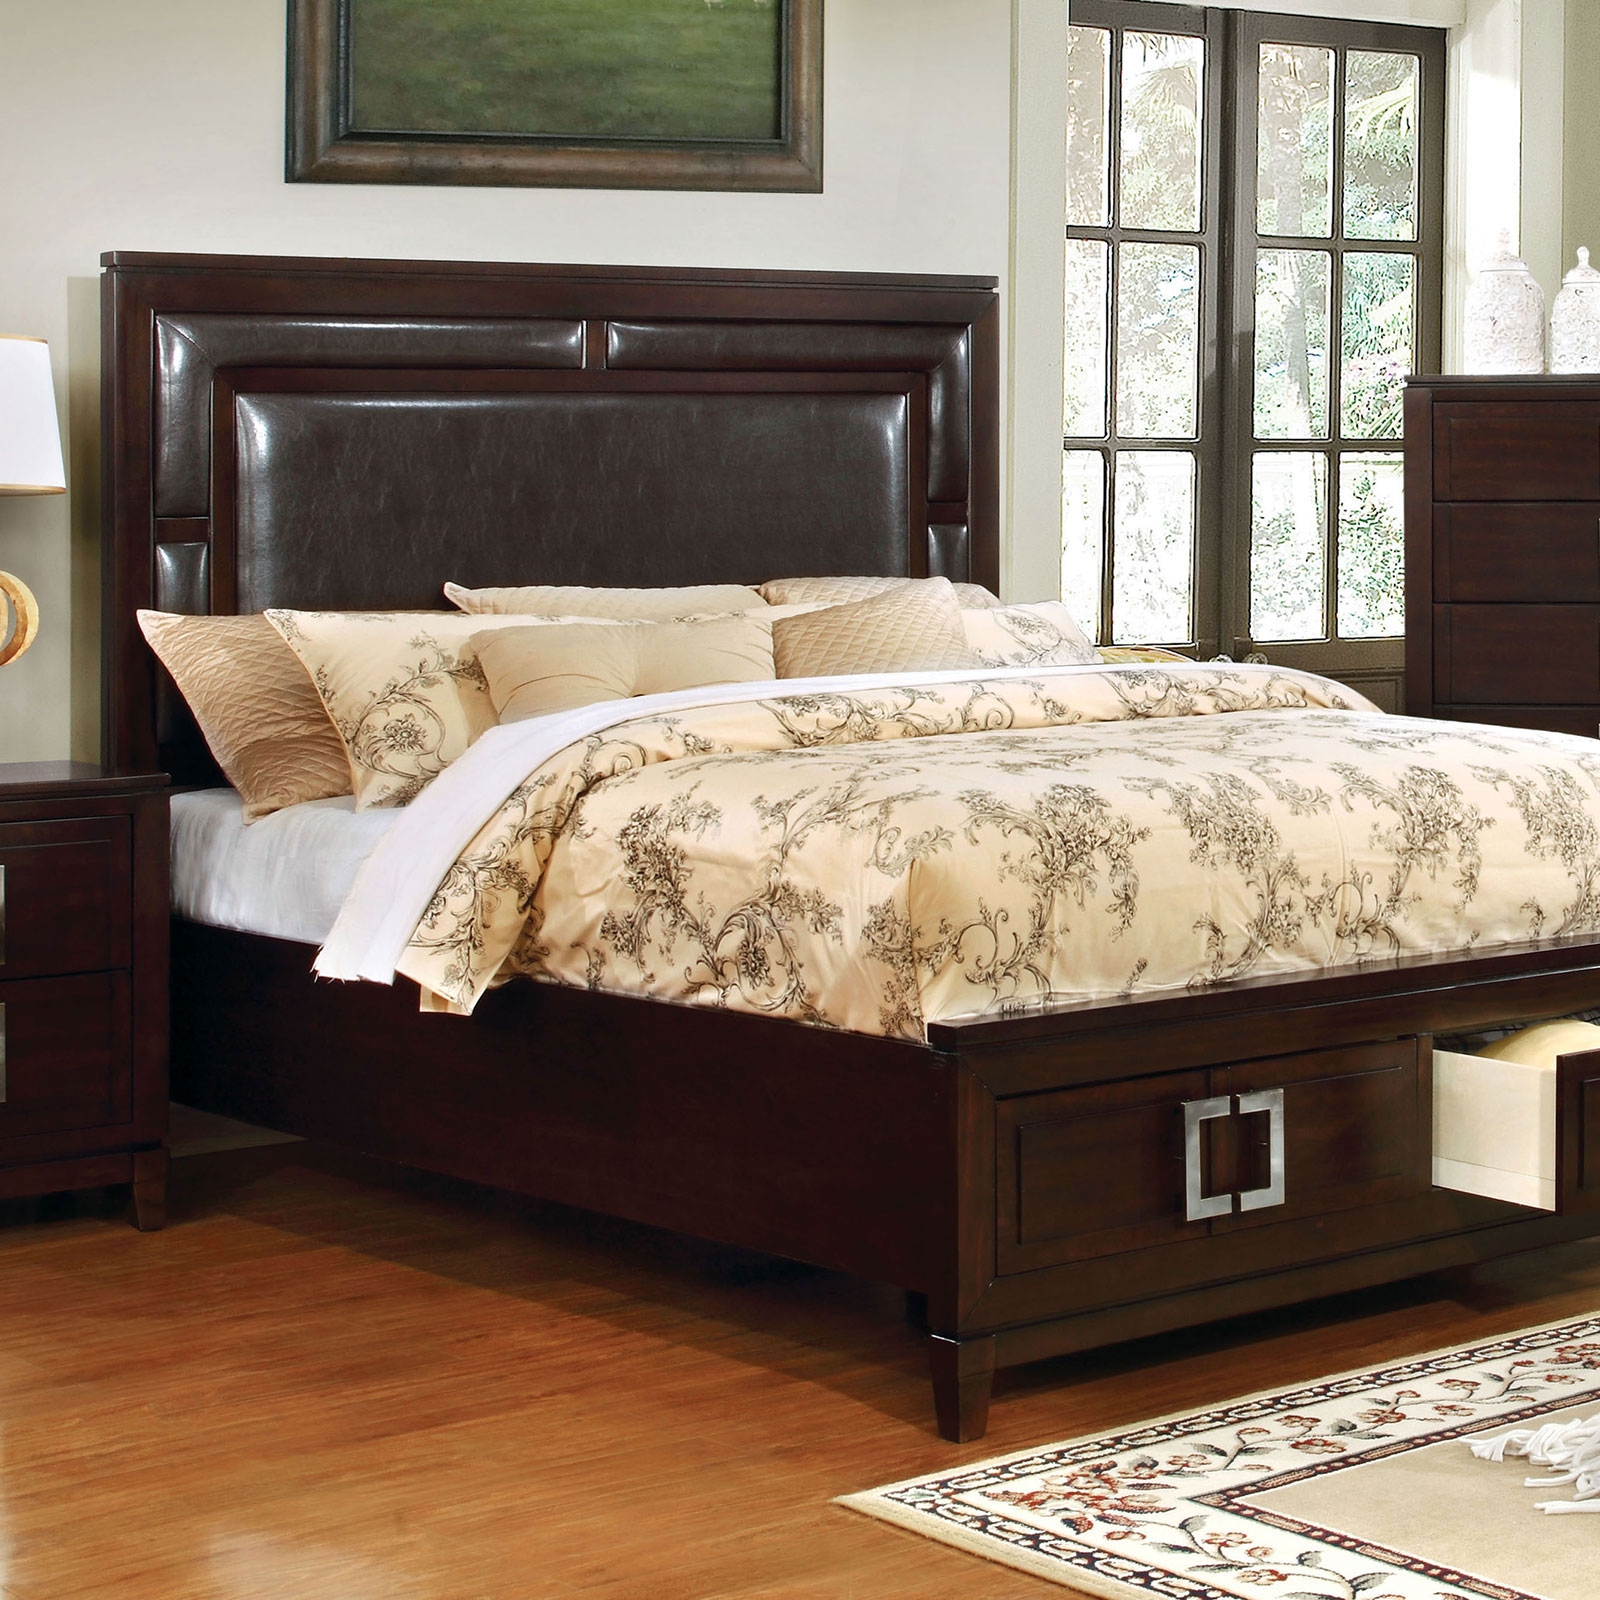 Beds & More Orlando – We buy and sell new & used furniture